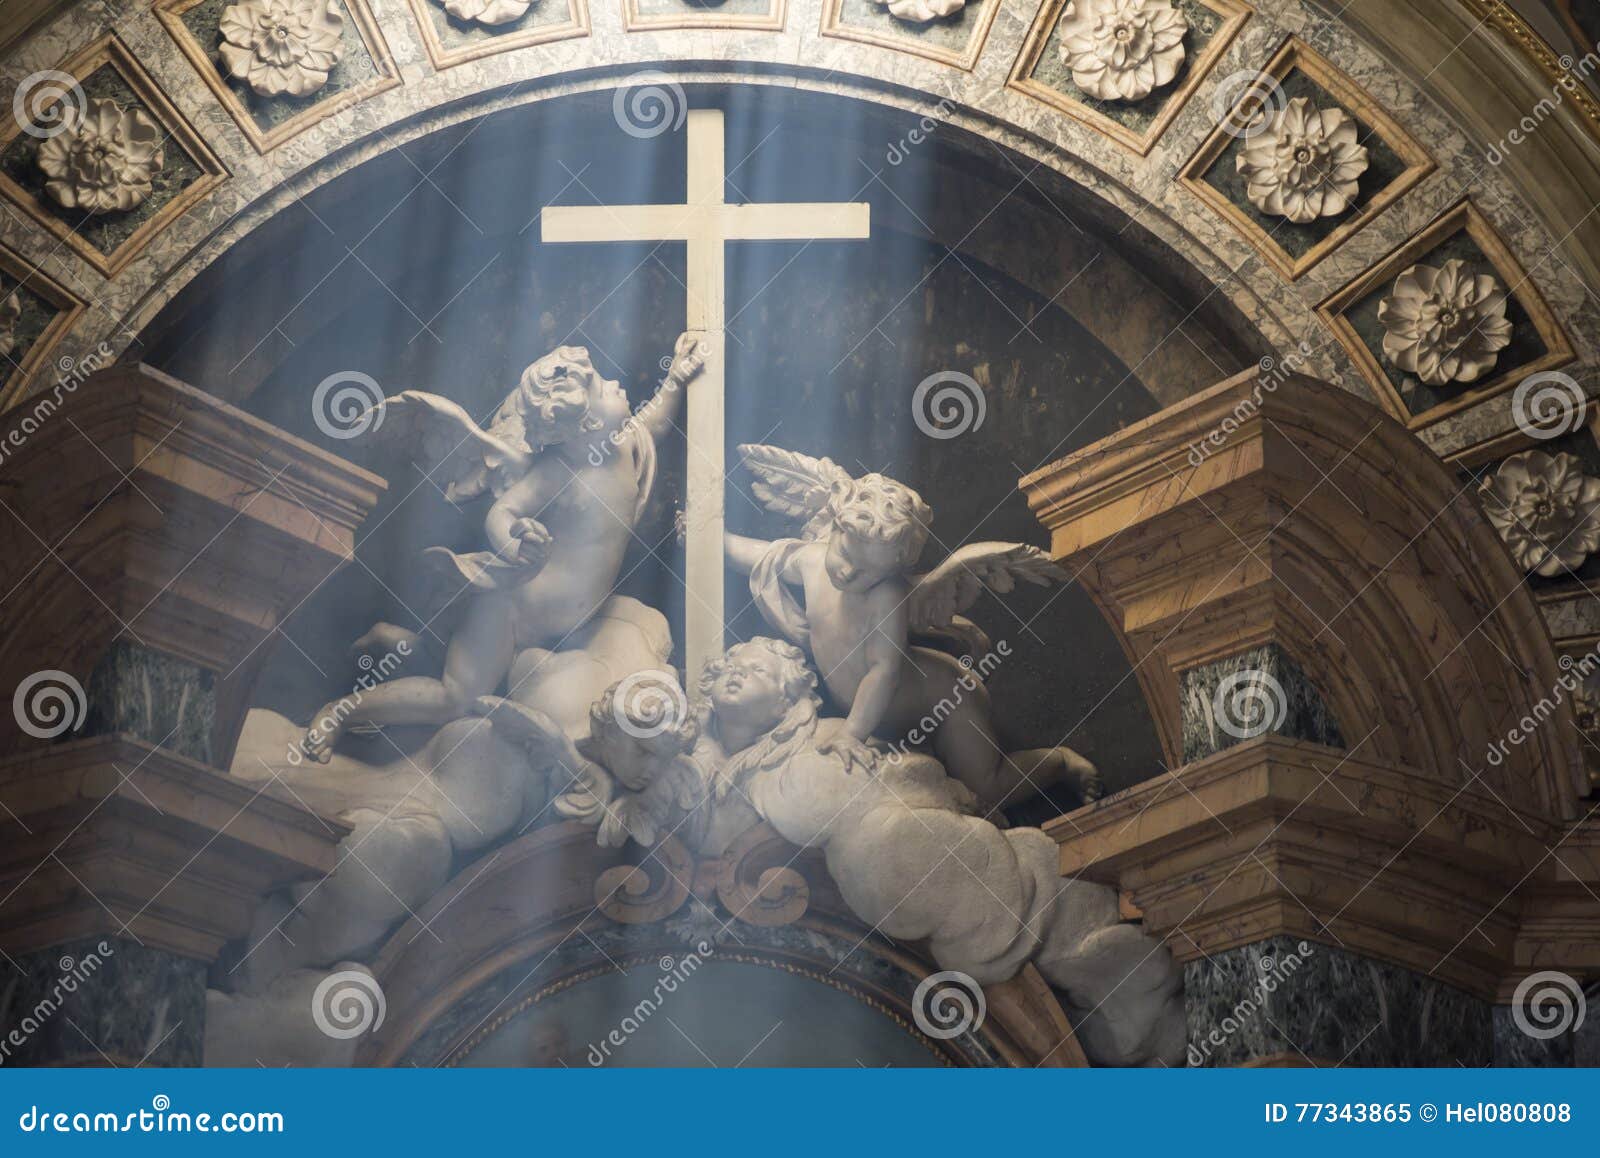 light incidence - angels holding cross, cathedral bologna